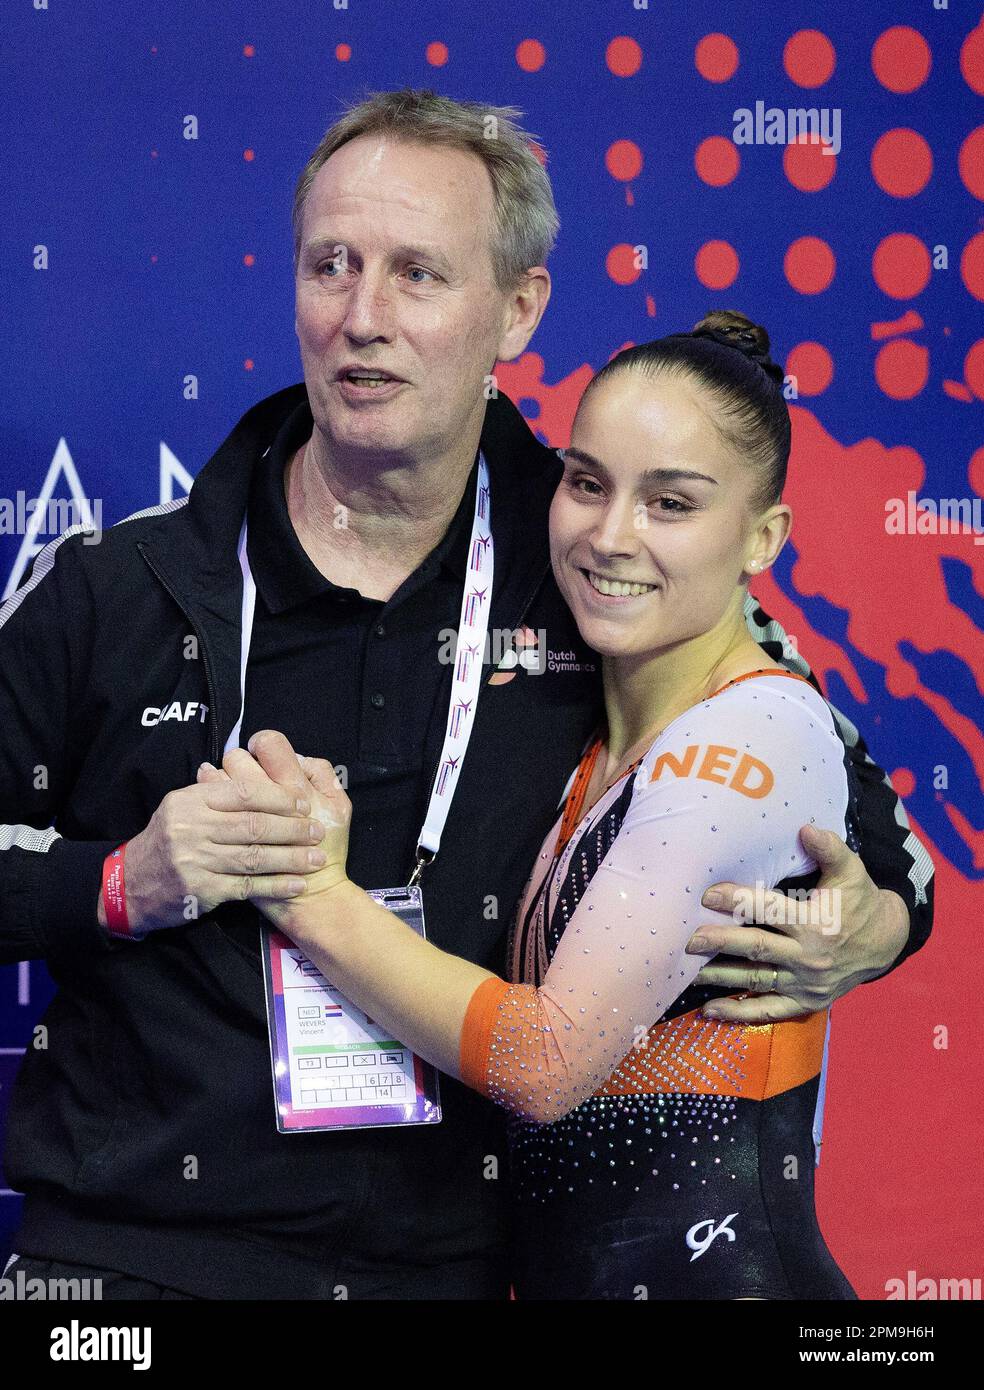 ANTALYA - Vincent Wevers and Vera van Pol in action during the  qualification of the European gymnastics championships in Turkey. ANP IRIS  VAN DEN BROEK netherlands out - belgium out Stock Photo - Alamy